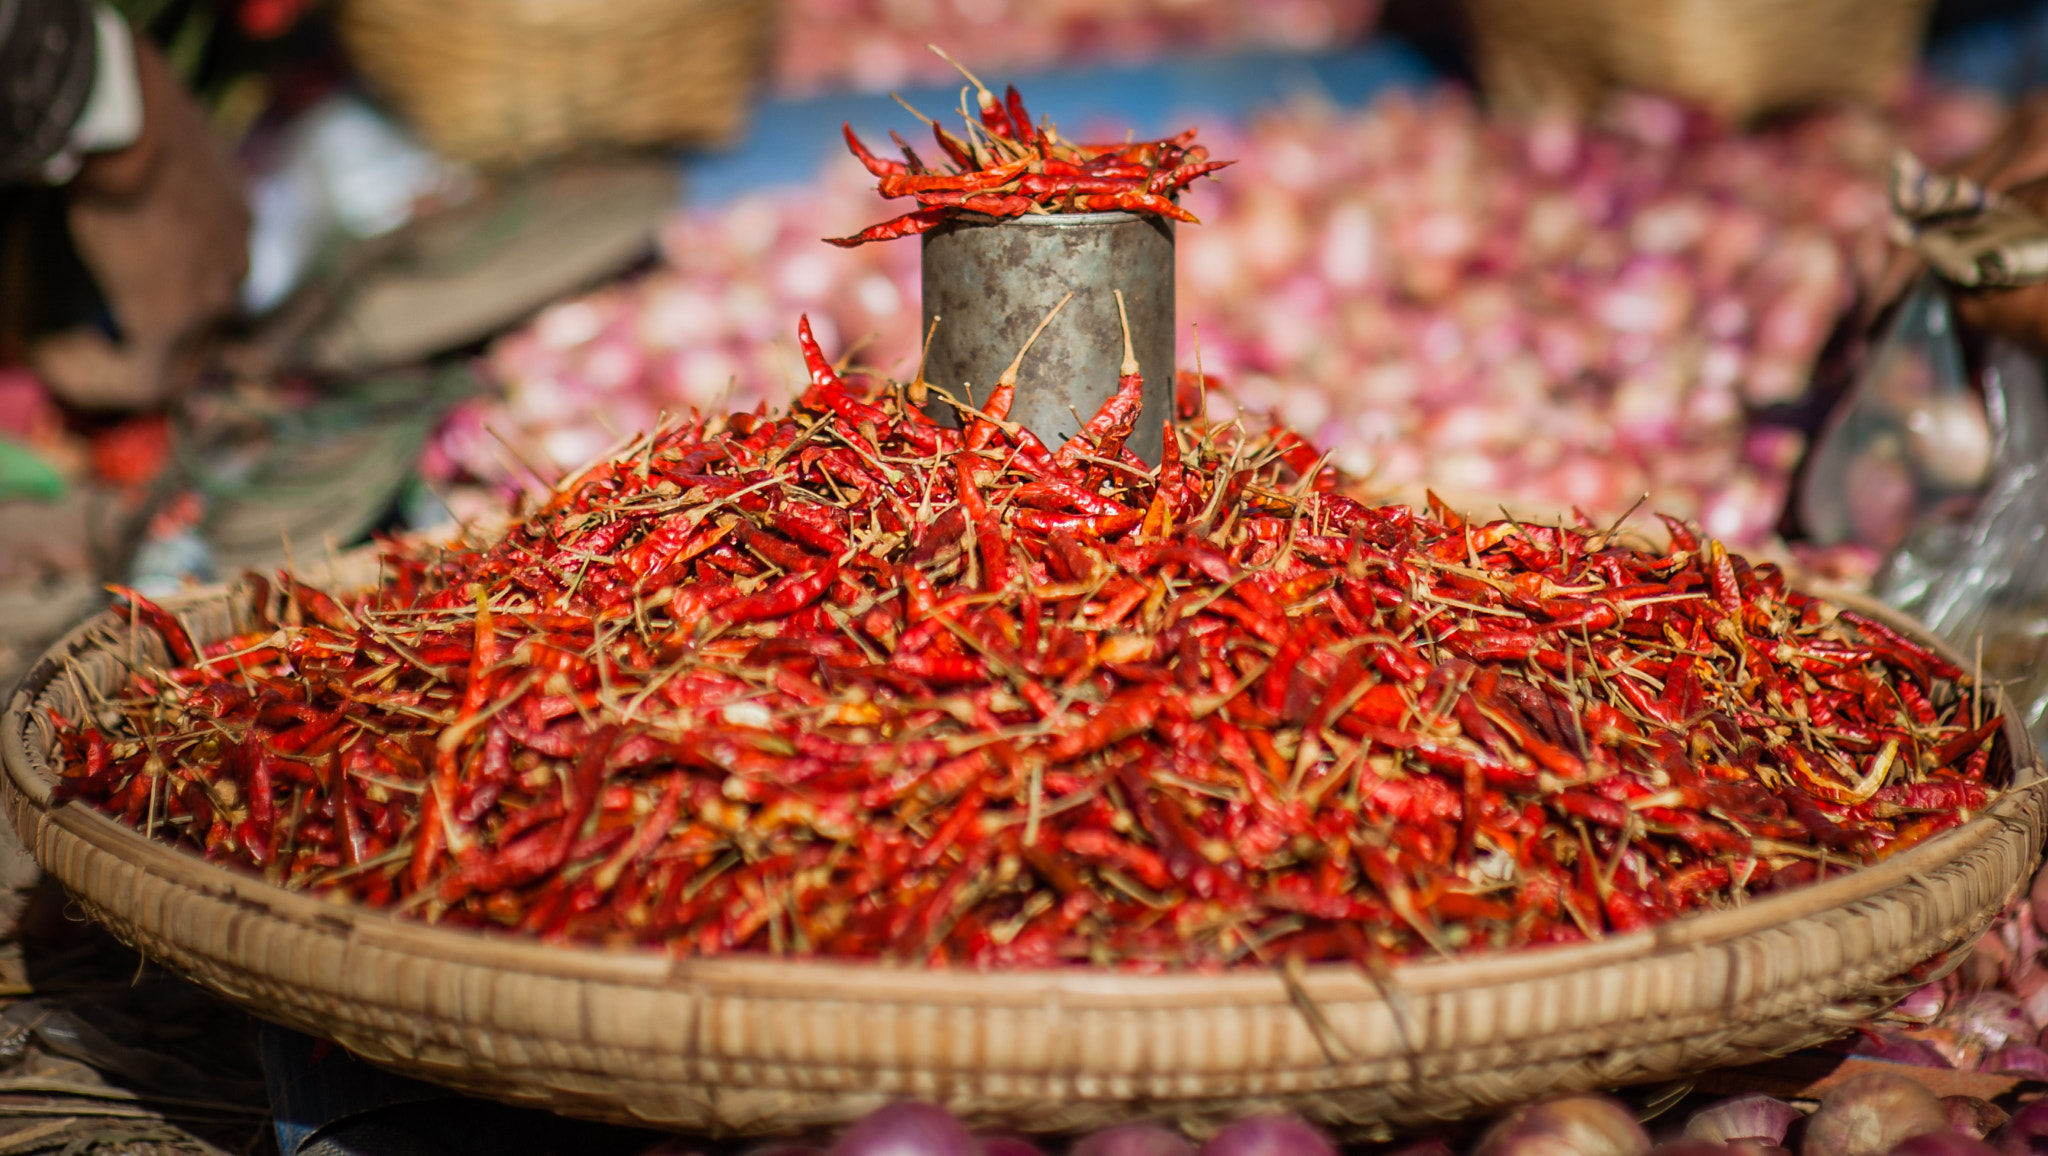 Nikon D700 sample photo. Basket with red chillies at market in myanmar photography